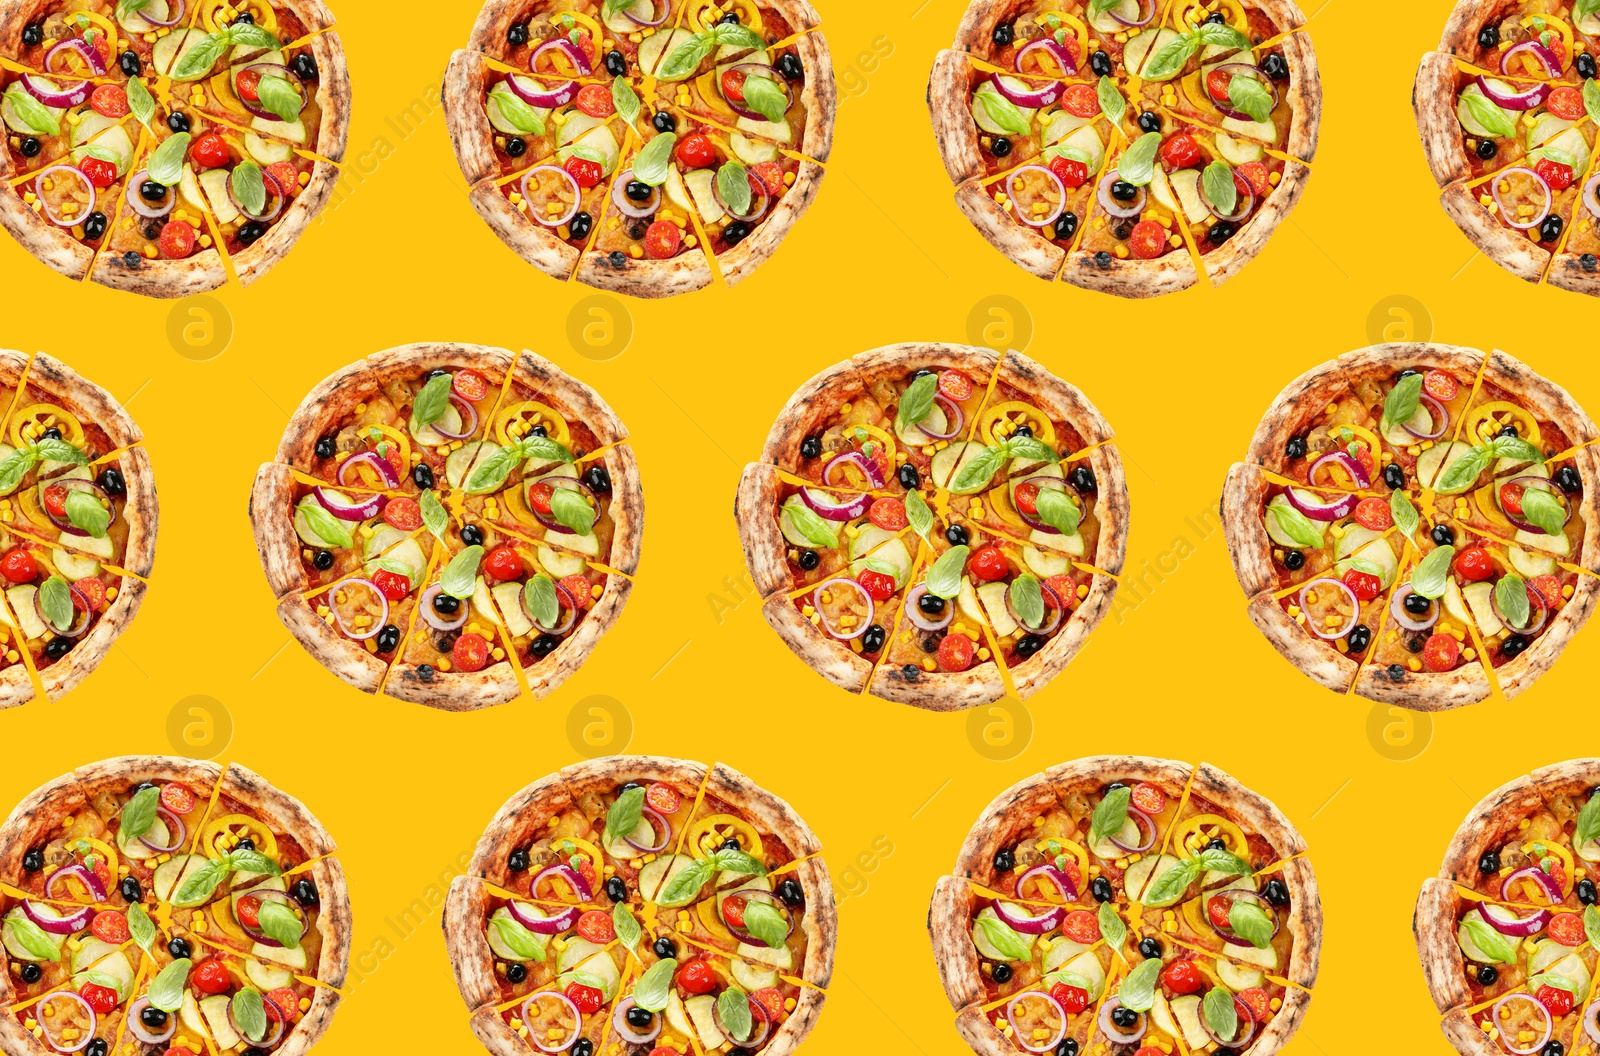 Image of Vegetable pizza pattern design on yellow background